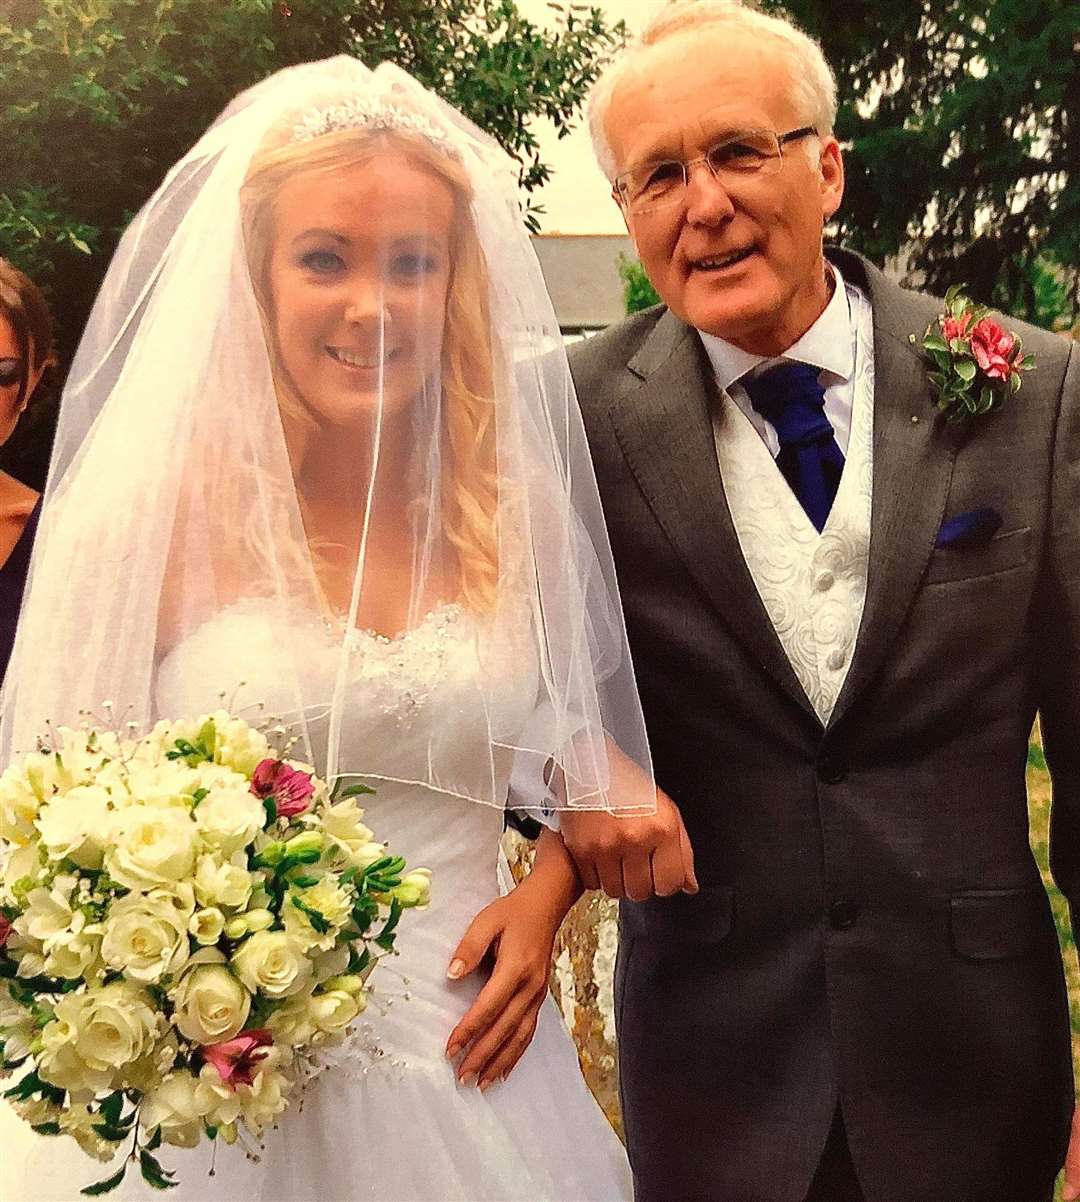 Clive Flisher with his daughter Nicola on her wedding day. Photo: Nicola Allen